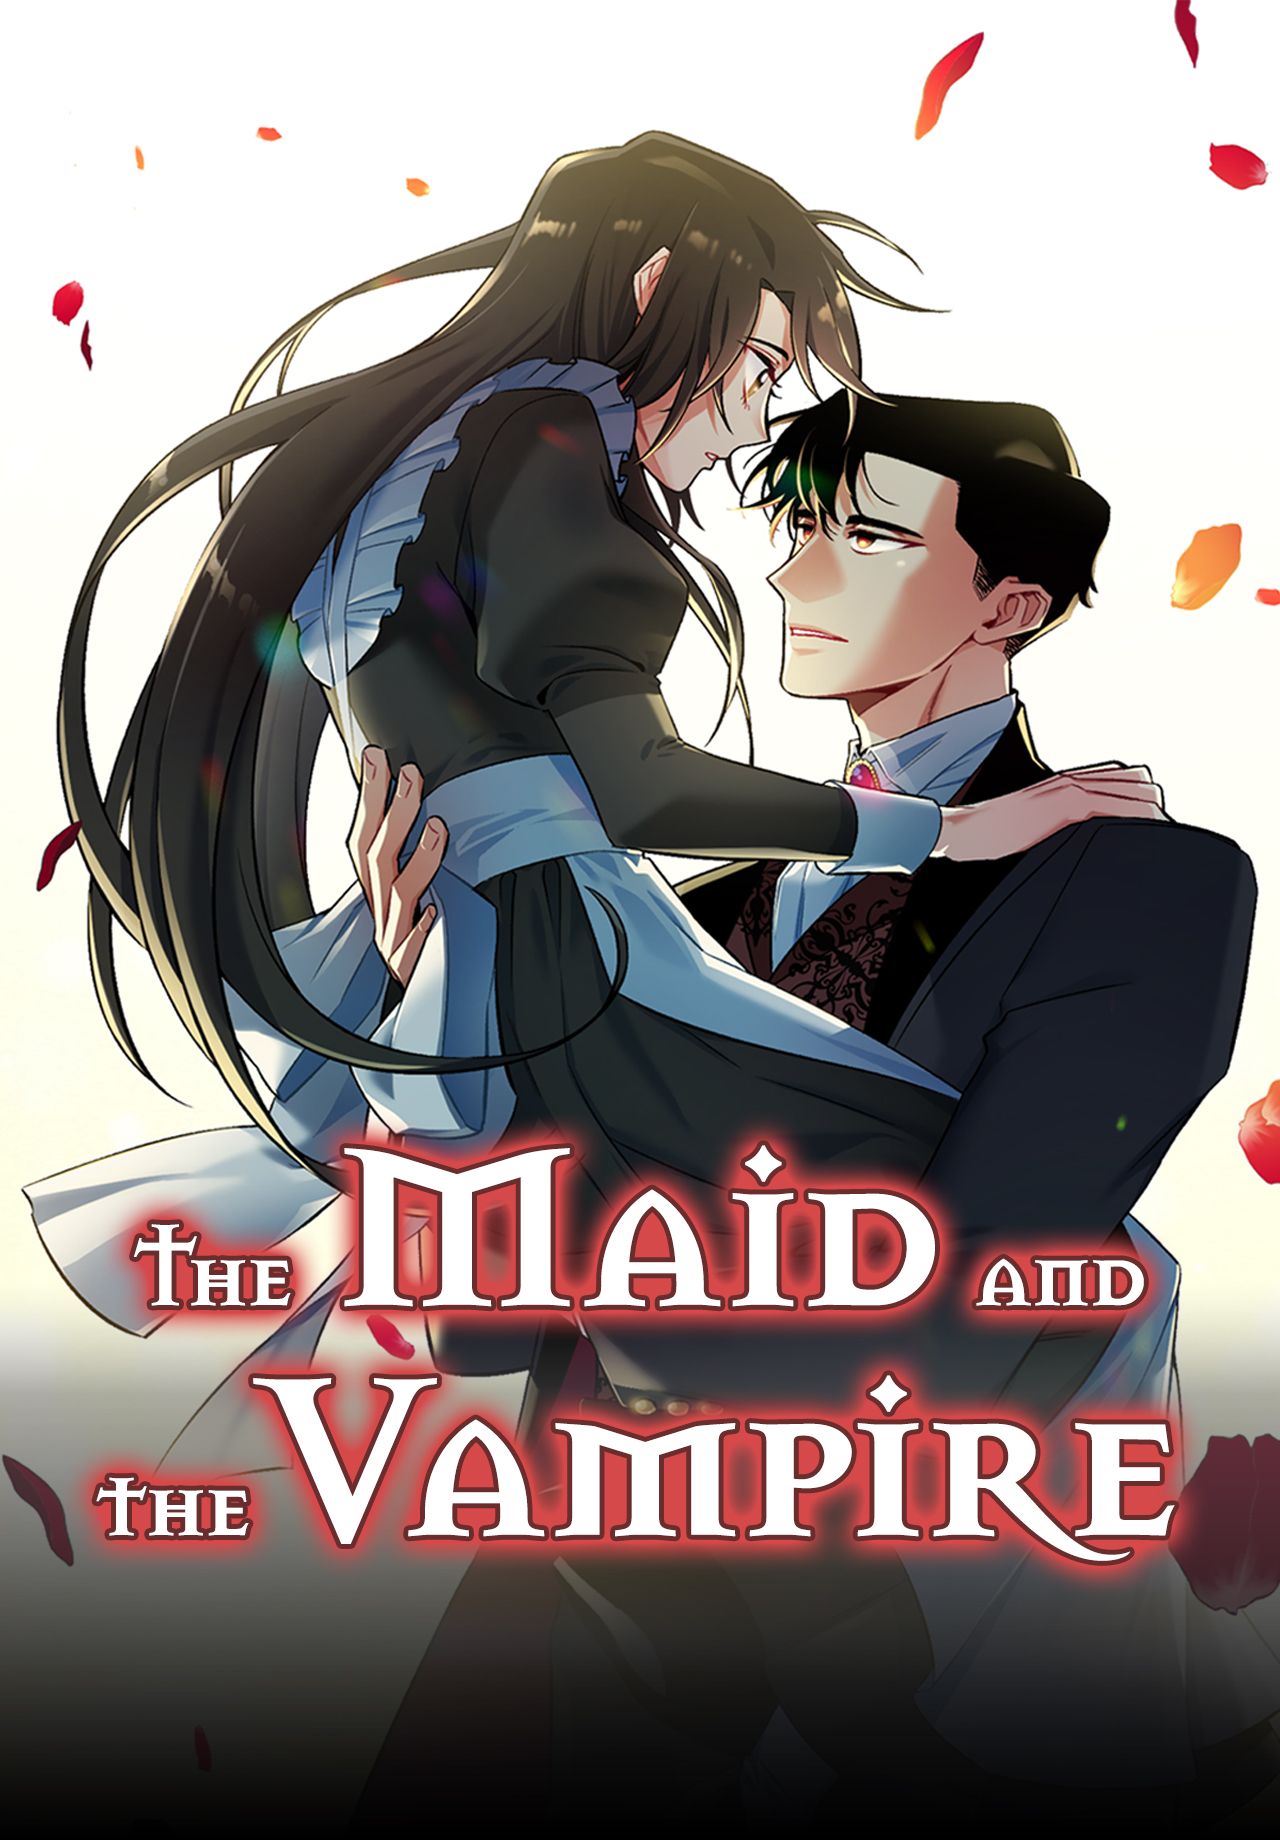 Duke Millard Travis lifts up Areum in The Maid and the Vampire